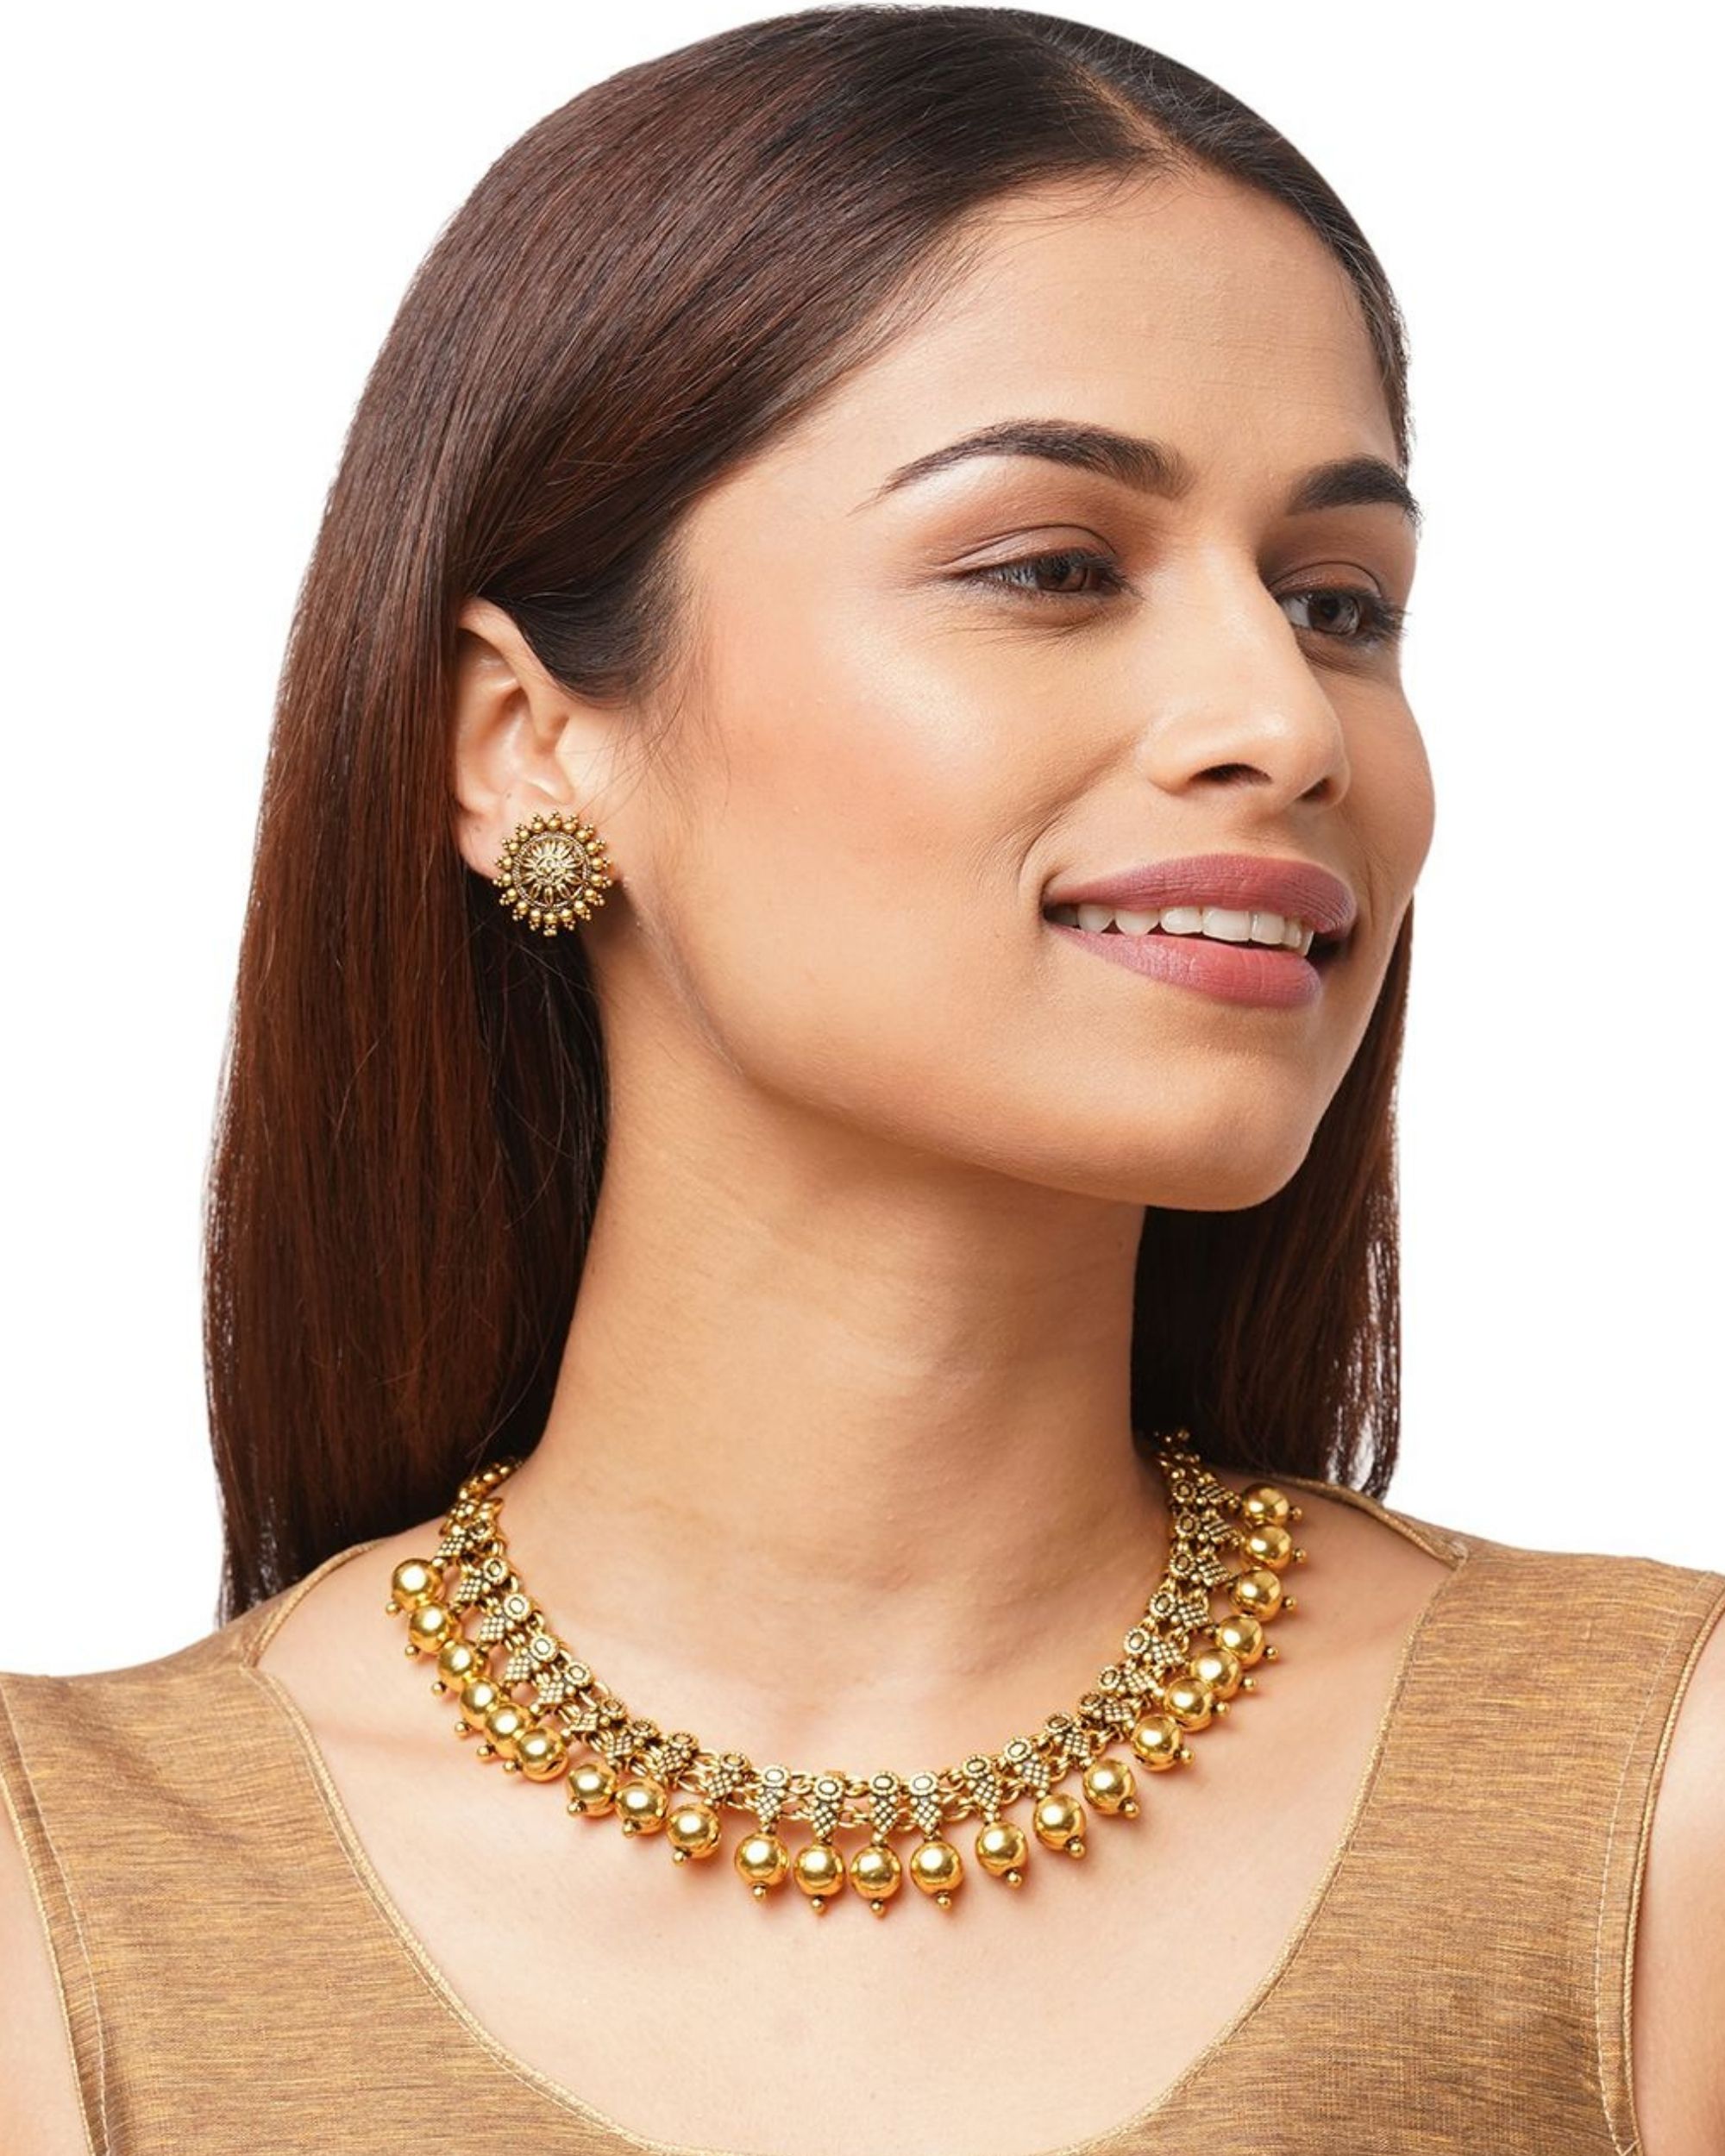 OOMPH Green Beads  Kundan Multi Layer Ethnic Choker Necklace Set with Matching  Earrings Buy OOMPH Green Beads  Kundan Multi Layer Ethnic Choker Necklace  Set with Matching Earrings Online at Best